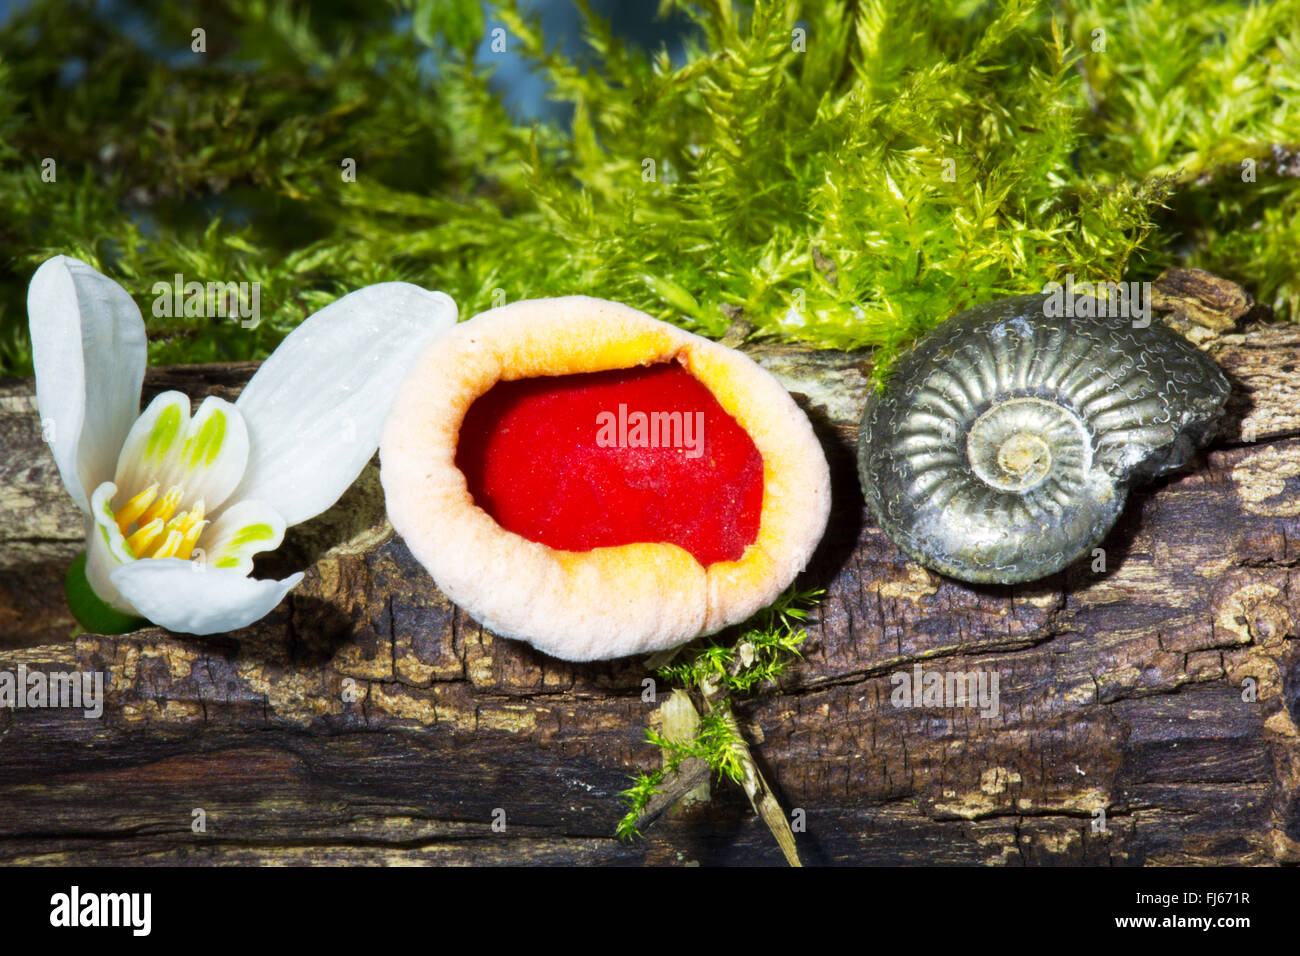 Scarlet Elf Cup Fungi, Sarcoscypha coccinea, a snowdrop flower and a tiny fossil ammonite on a rotten branch. Stock Photo